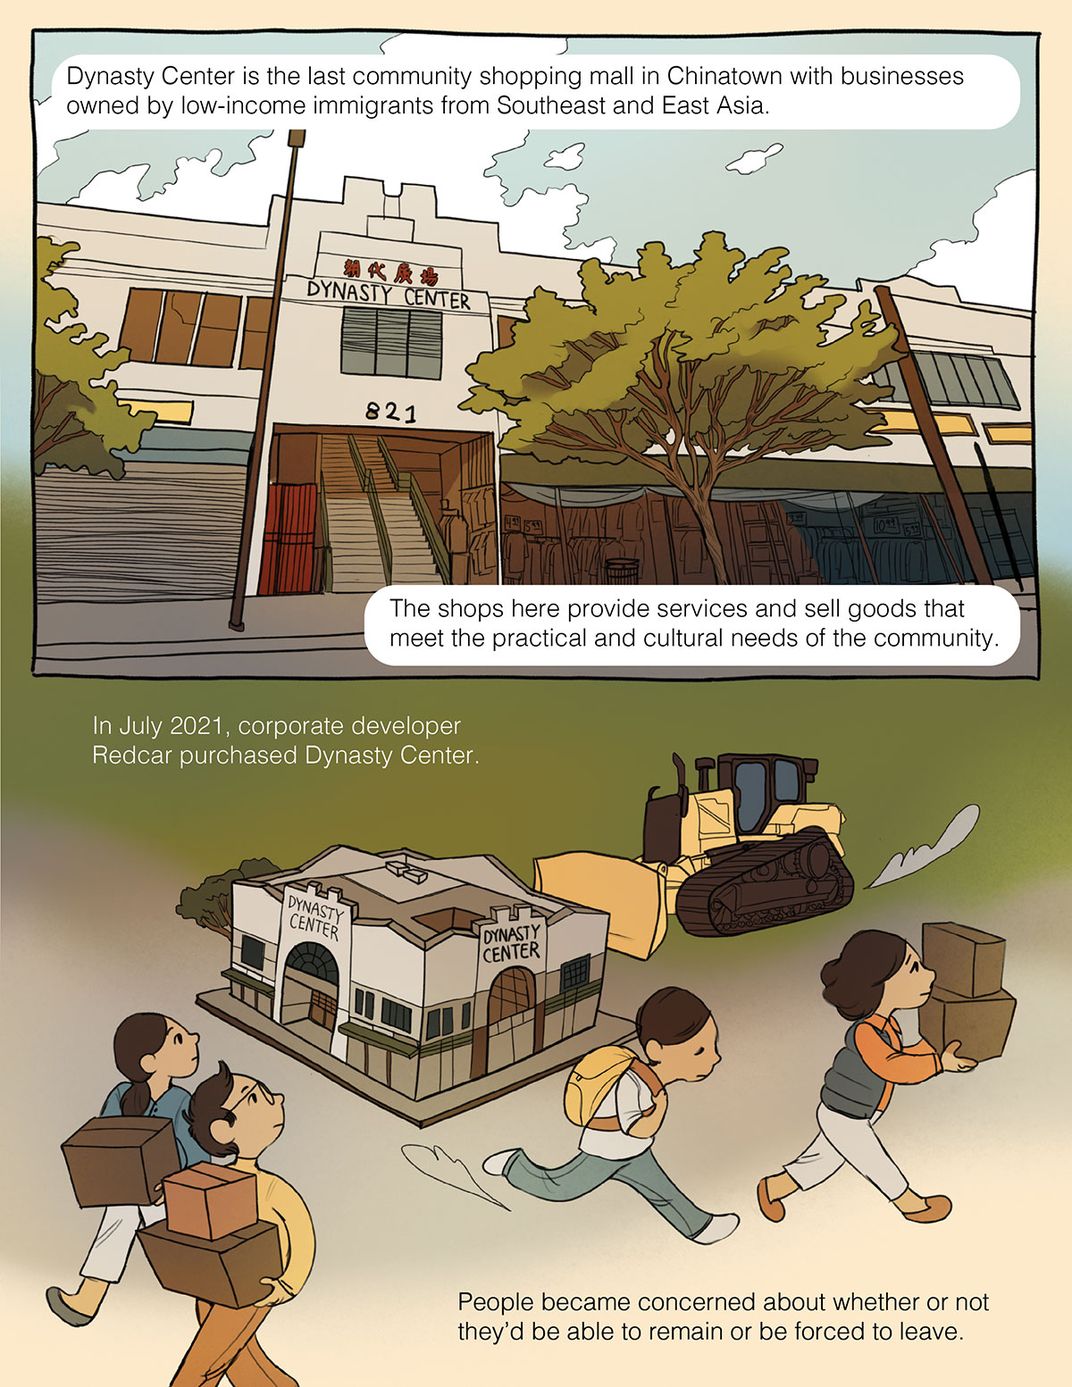 Illustrated comic page. Top panel: One of Dynasty Center’s entrances, with a staircase leading upwardand open shops displaying clothes and other goods on the bottom level. Trees planted on the sidewalks.